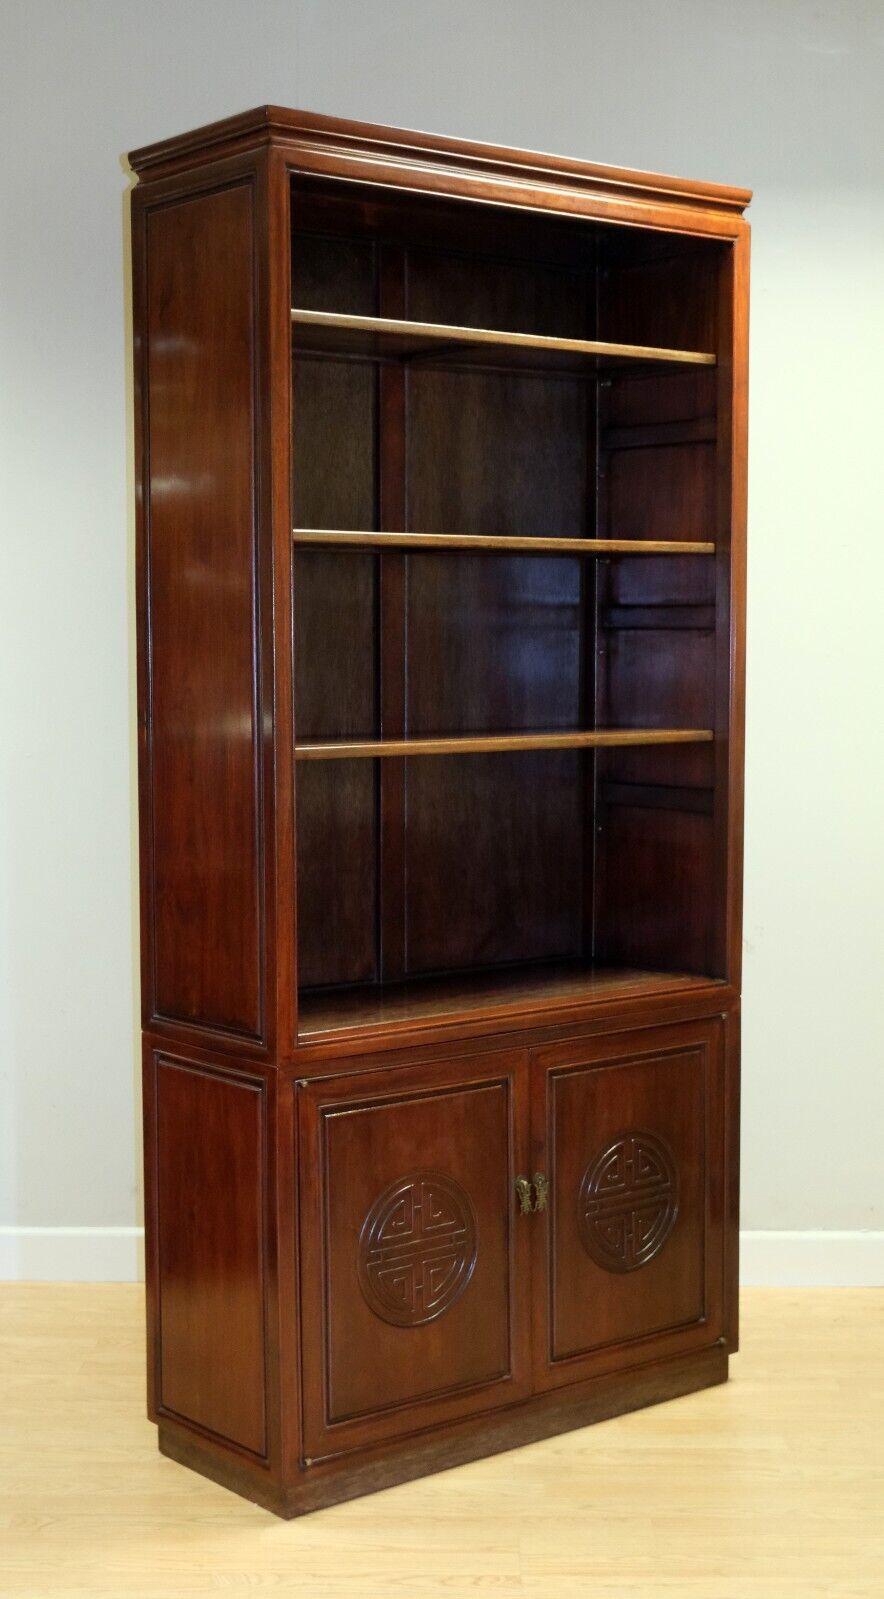 LOVELY CHINESE TEAK LiBRARY BOOKCASE CABINET ON PLINTH BASE & CARVED DOORS 3